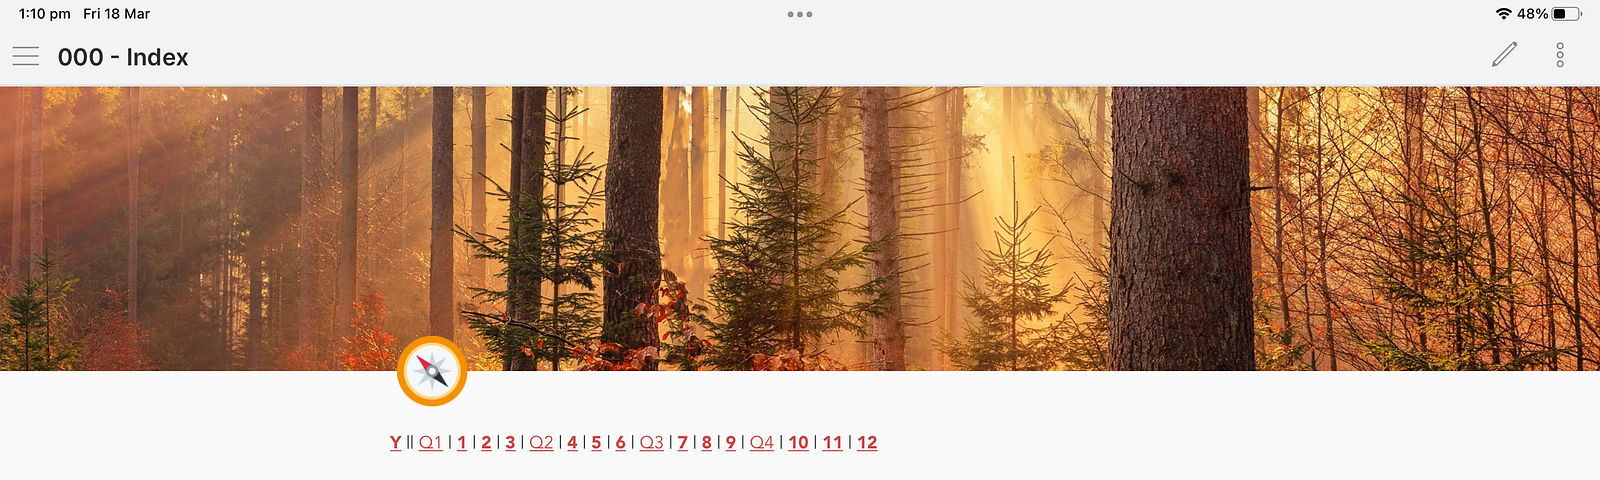 Screenshot of Obsidian Index page, with autumn-toned forest banner at the top